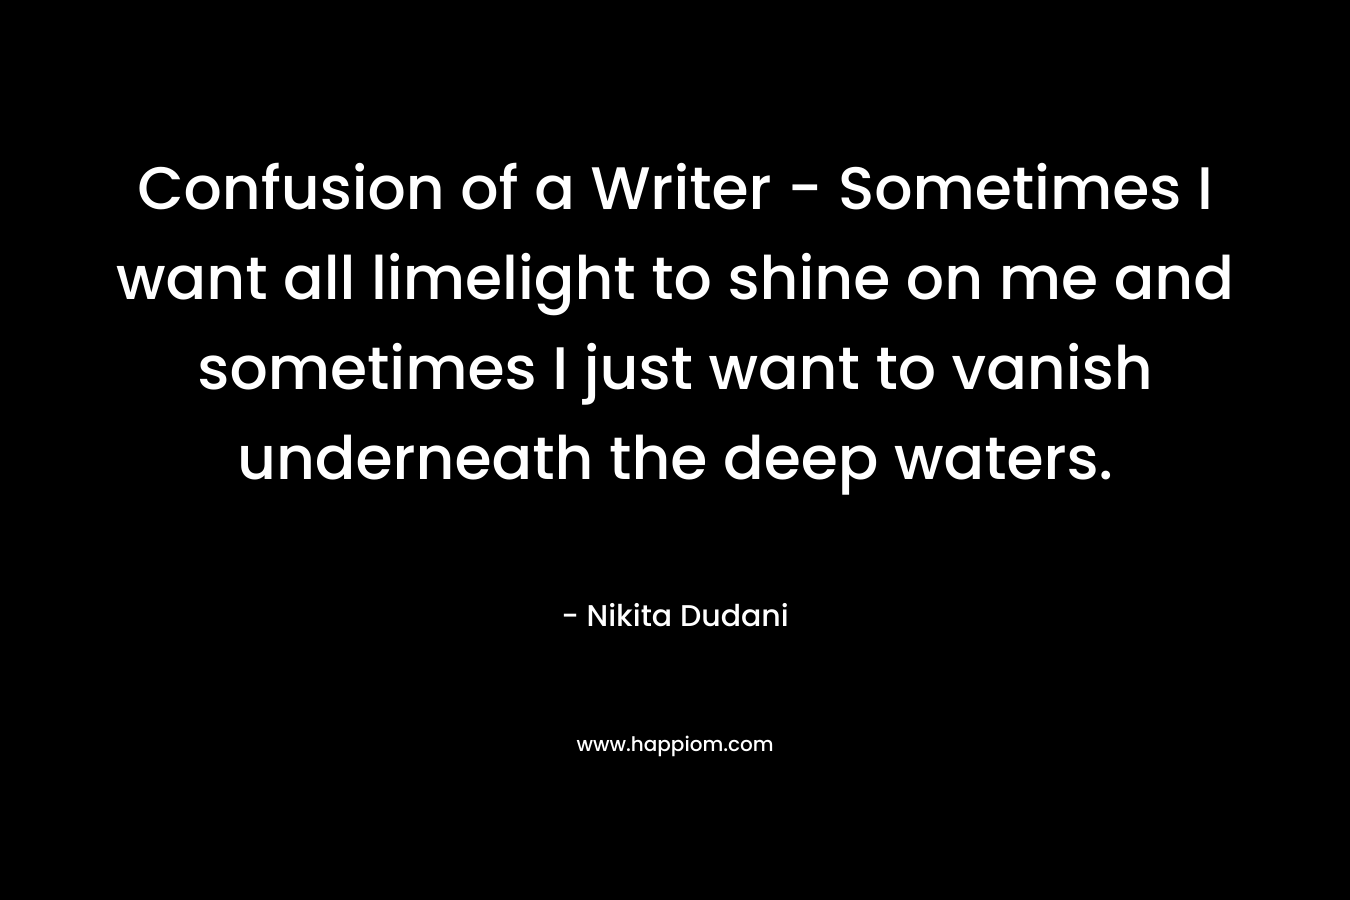 Confusion of a Writer - Sometimes I want all limelight to shine on me and sometimes I just want to vanish underneath the deep waters.